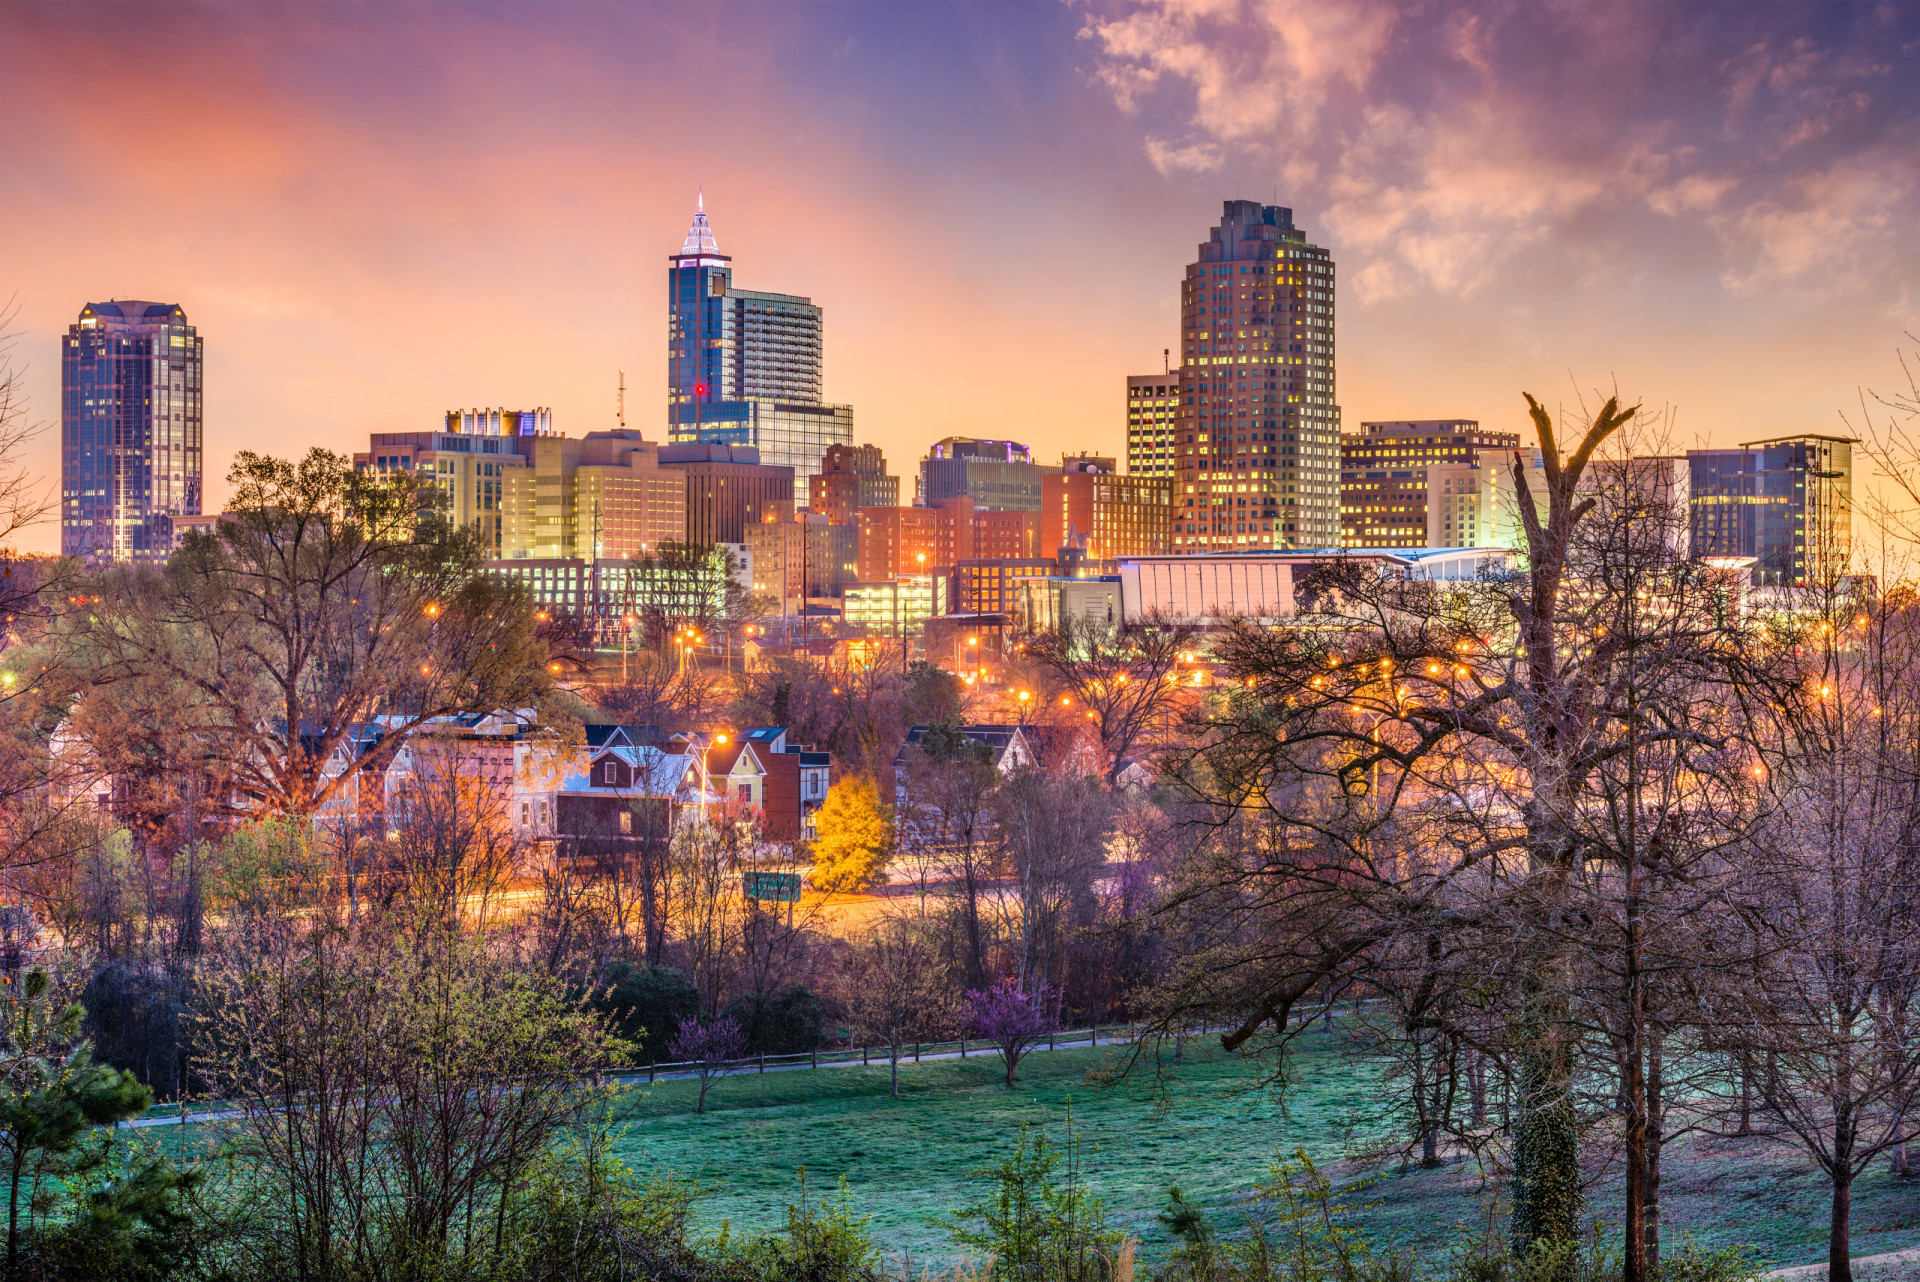 <p>Raleigh, with a rent index of 56.4, is a hub of education and technology in North Carolina. Its blend of academic institutions and tech companies makes it a highly desirable, yet costly, place to live.</p><p><a href="https://www.msn.com/en-in/community/channel/vid-7xx8mnucu55yw63we9va2gwr7uihbxwc68fxqp25x6tg4ftibpra?cvid=94631541bc0f4f89bfd59158d696ad7e">Follow us and access great exclusive content every day</a></p>